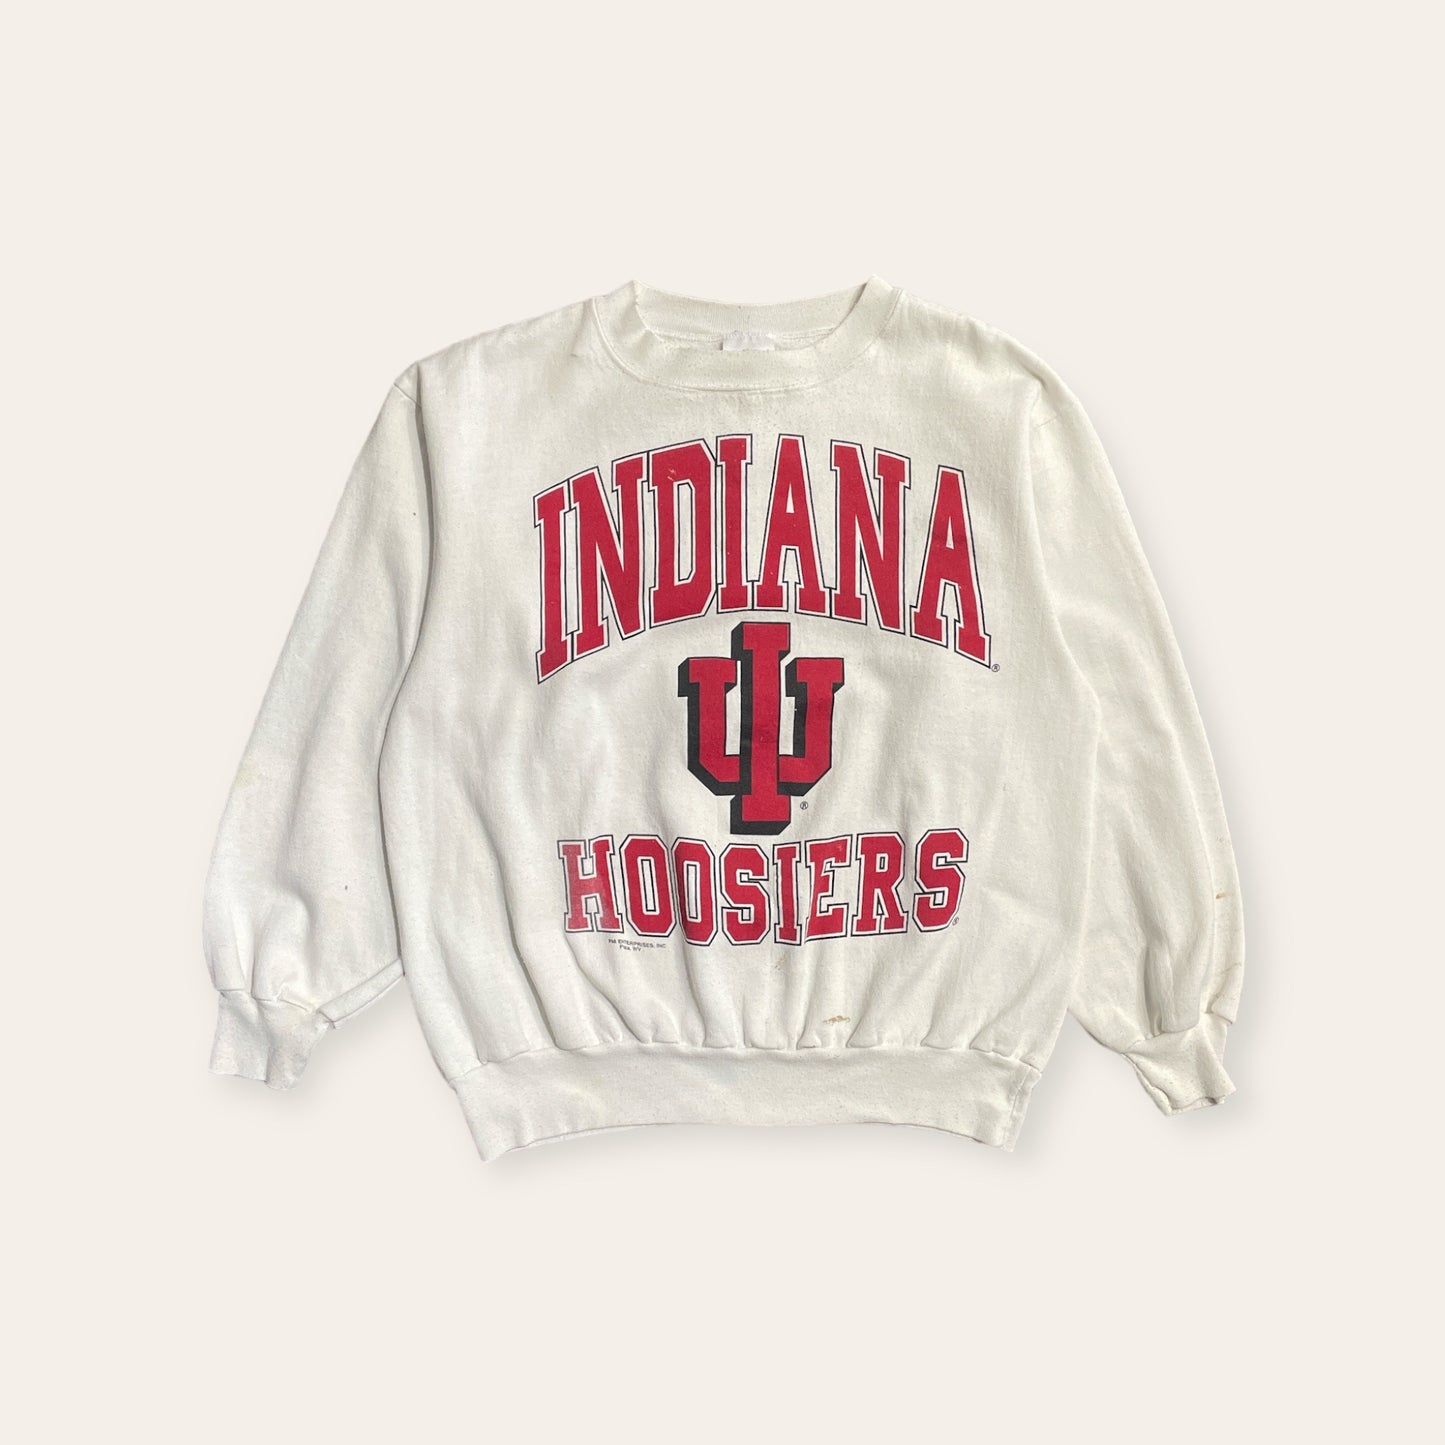 90s Indiana Hoosiers Sweater Size L